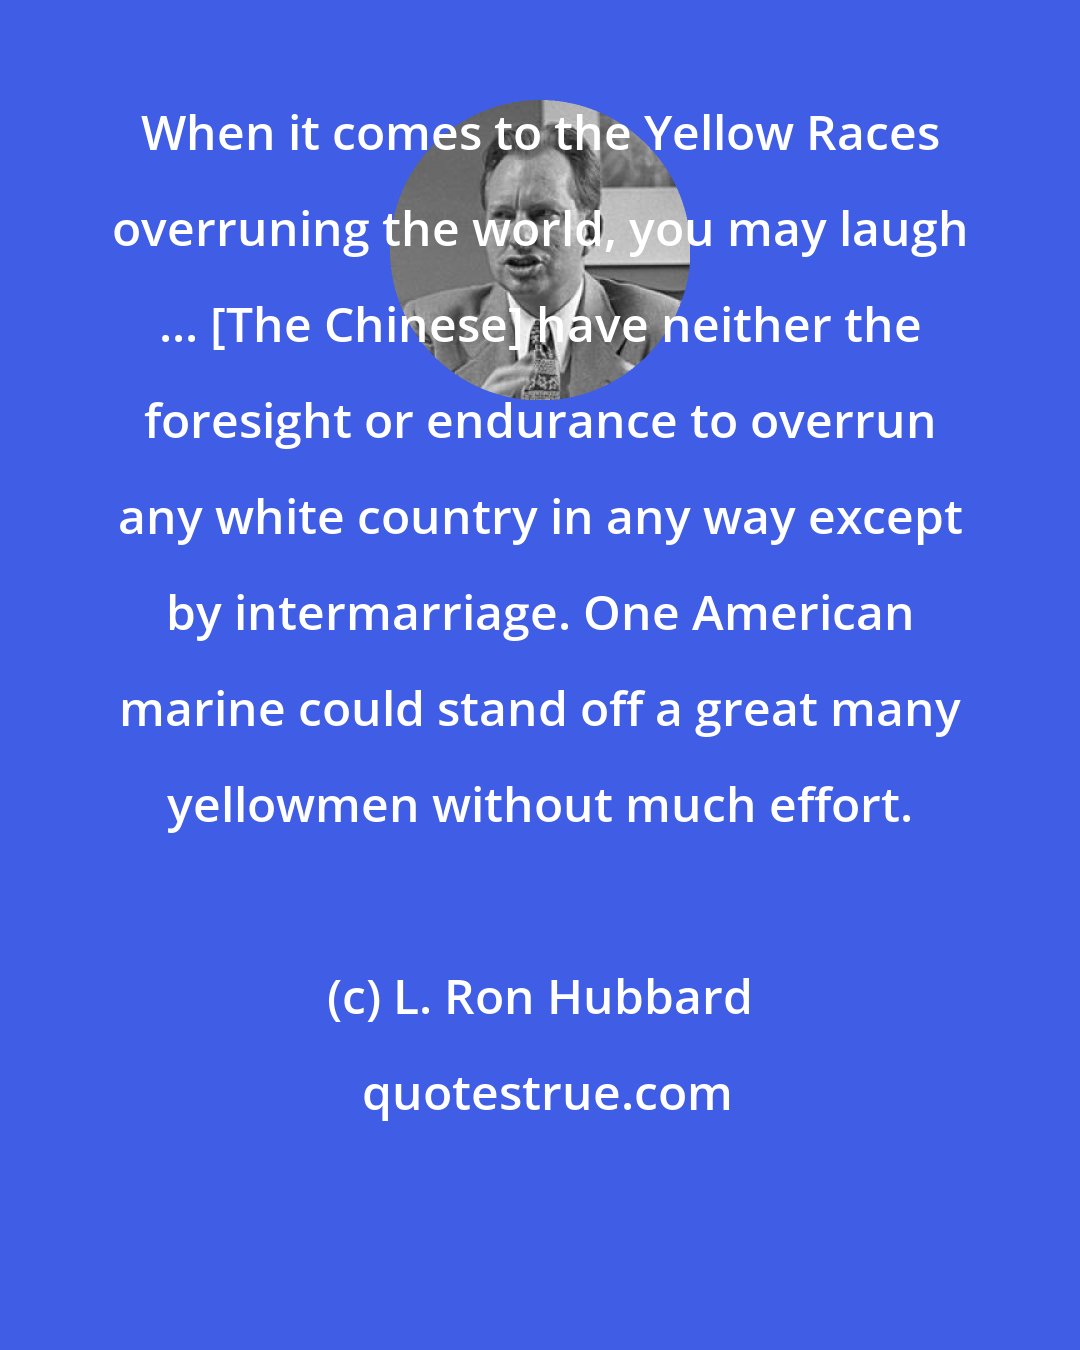 L. Ron Hubbard: When it comes to the Yellow Races overruning the world, you may laugh ... [The Chinese] have neither the foresight or endurance to overrun any white country in any way except by intermarriage. One American marine could stand off a great many yellowmen without much effort.